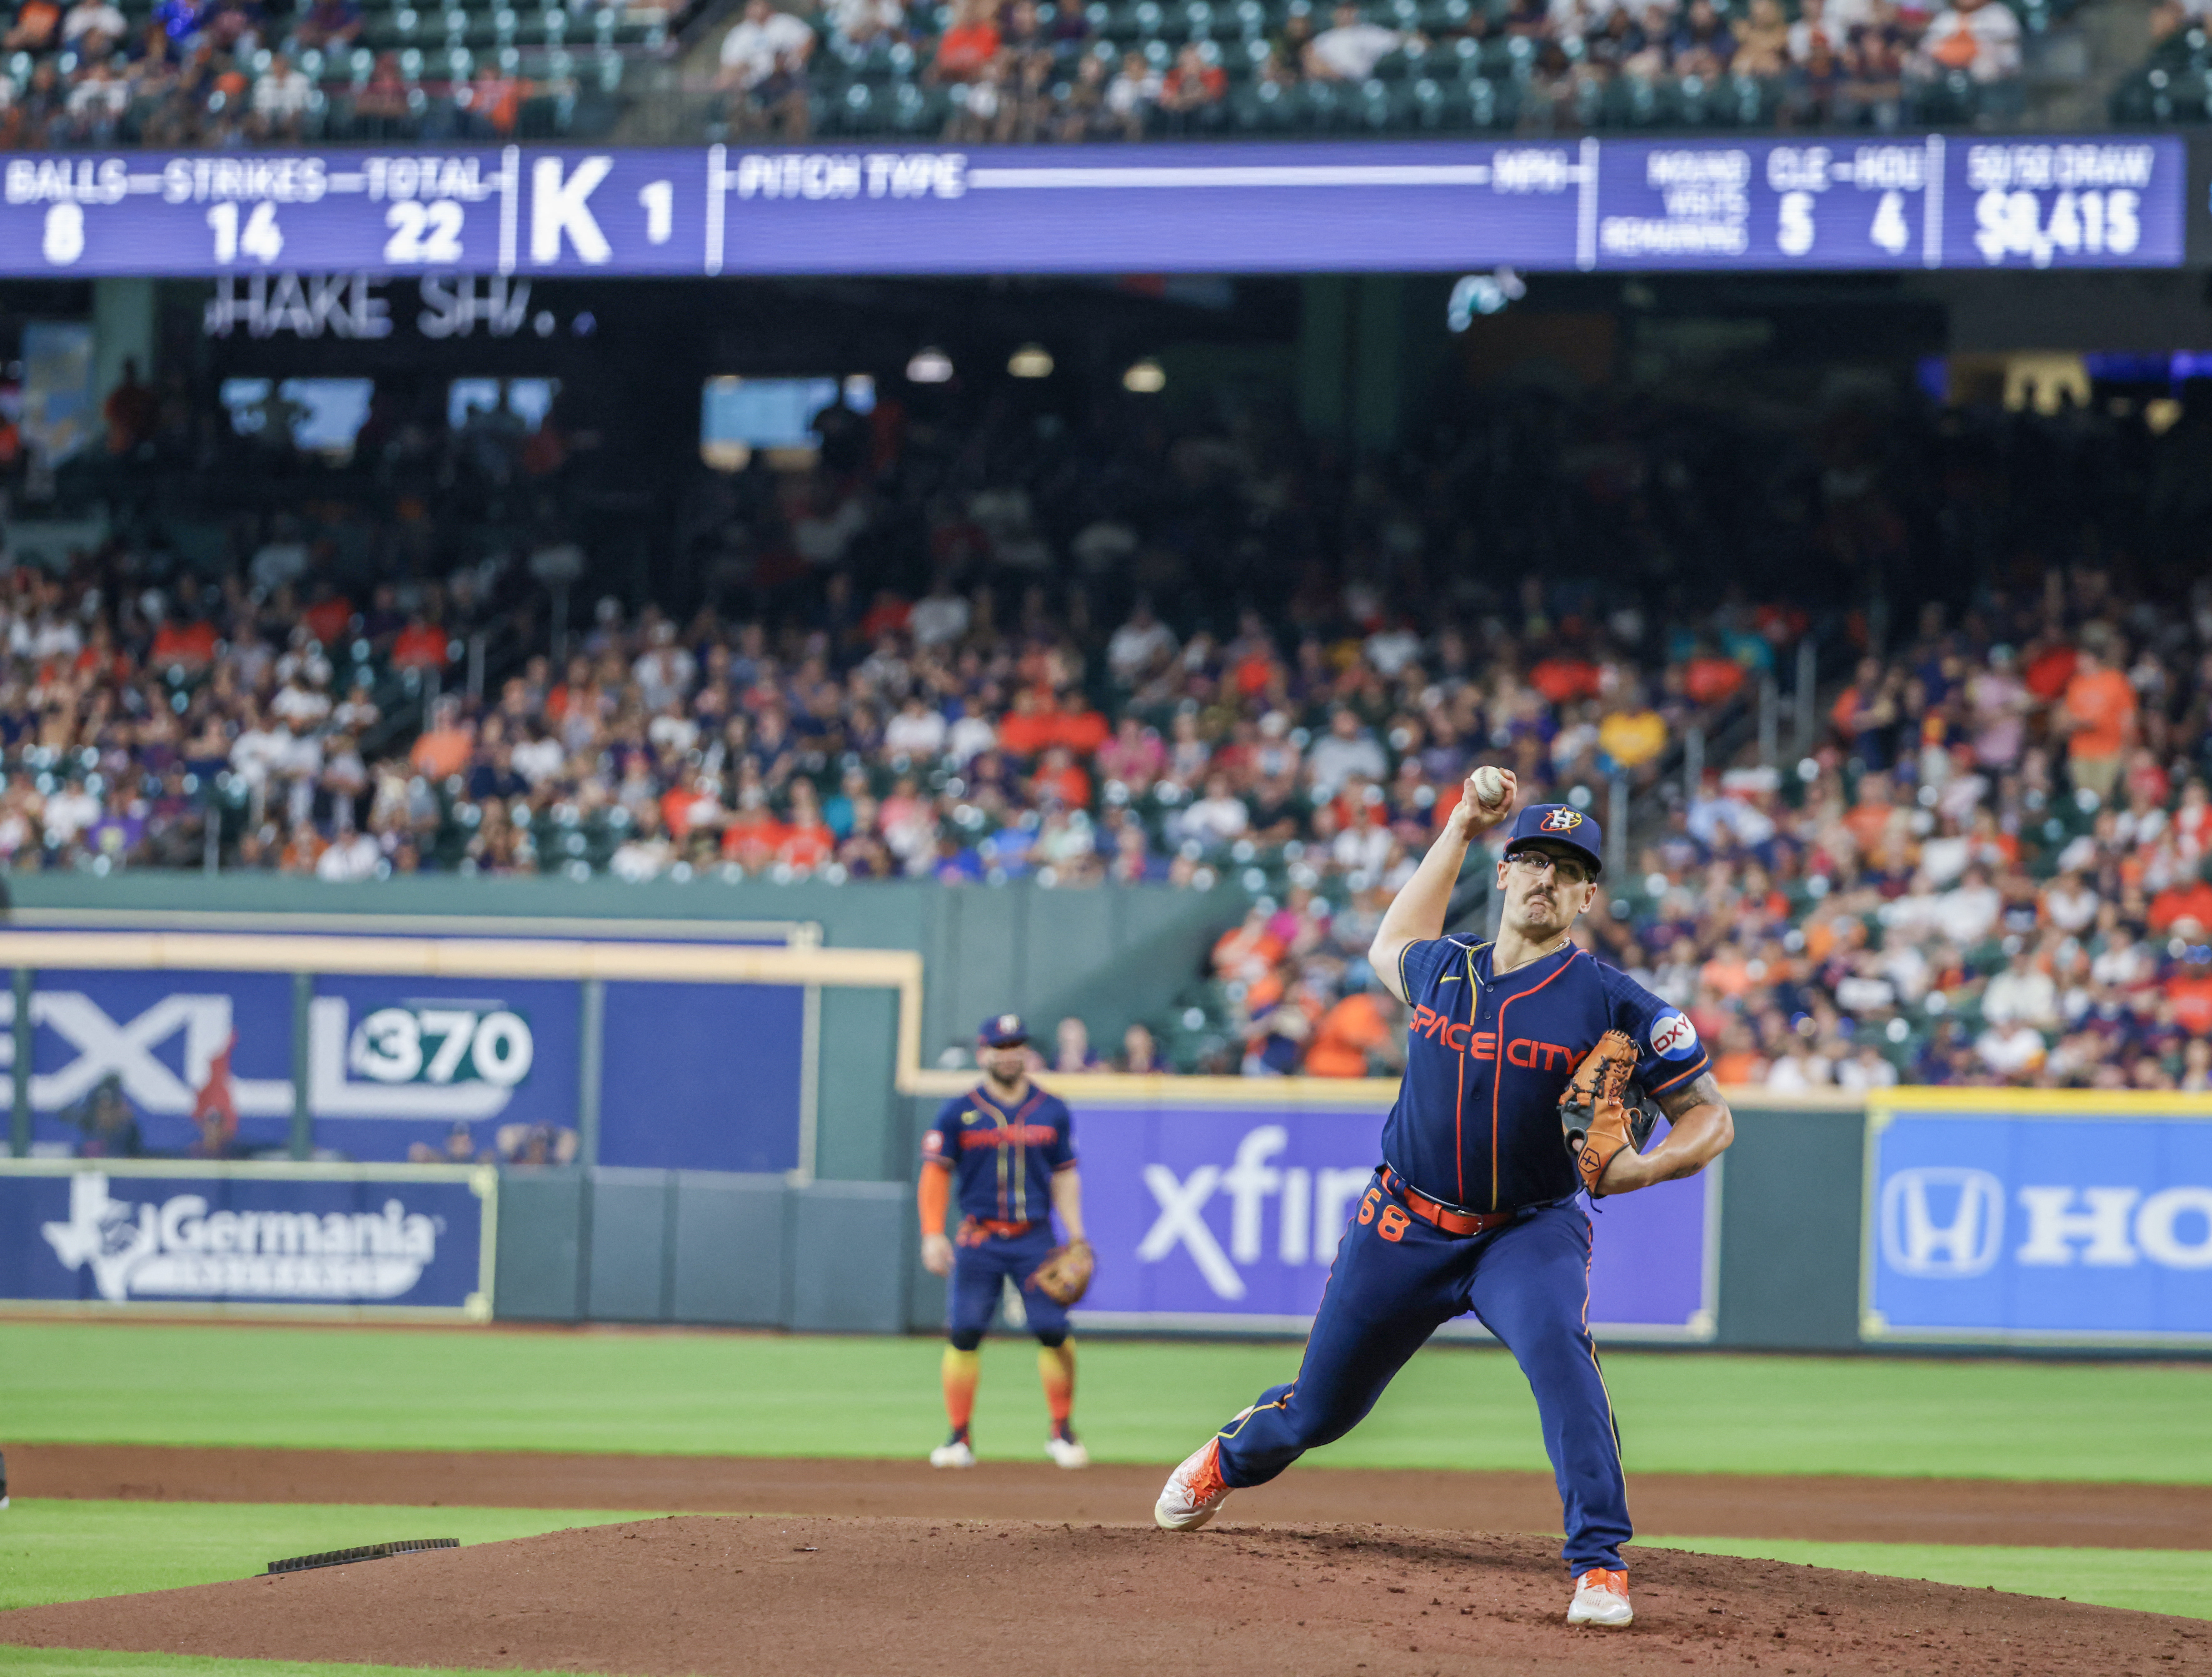 Astros rally past Guardians, now half-game out of first